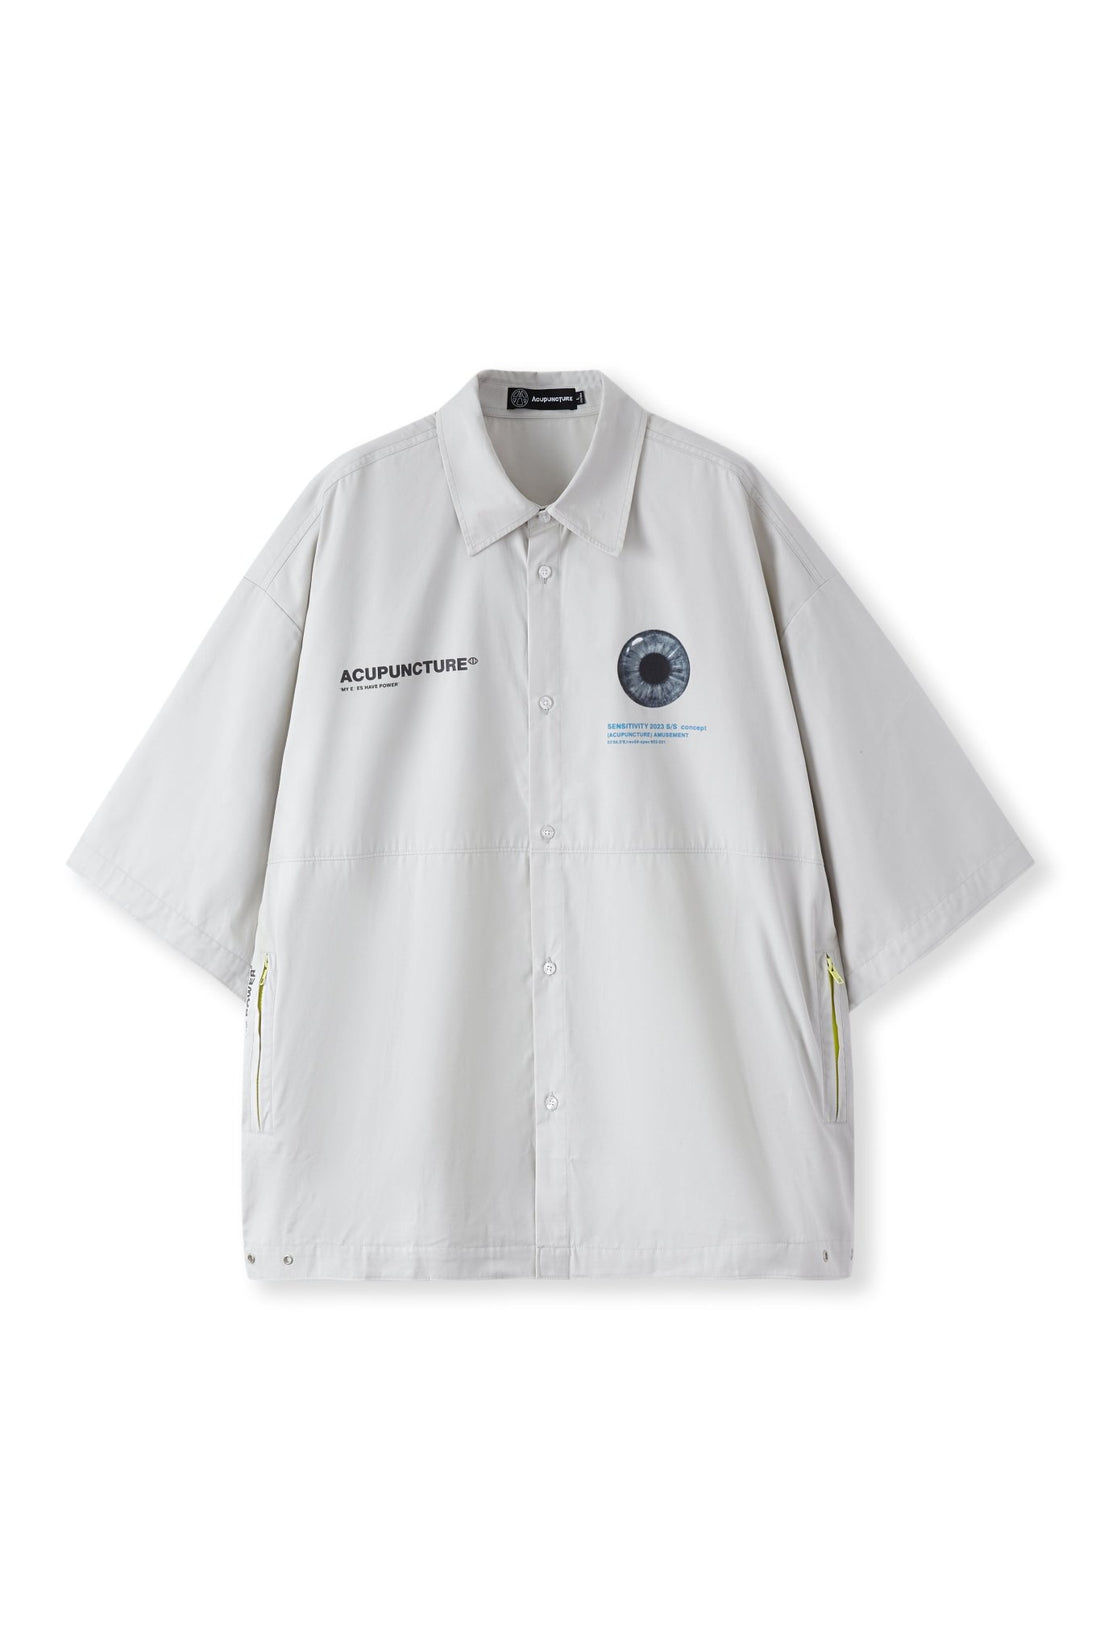 THE PUPIL SHIRT LIGHT GREY Acupuncture